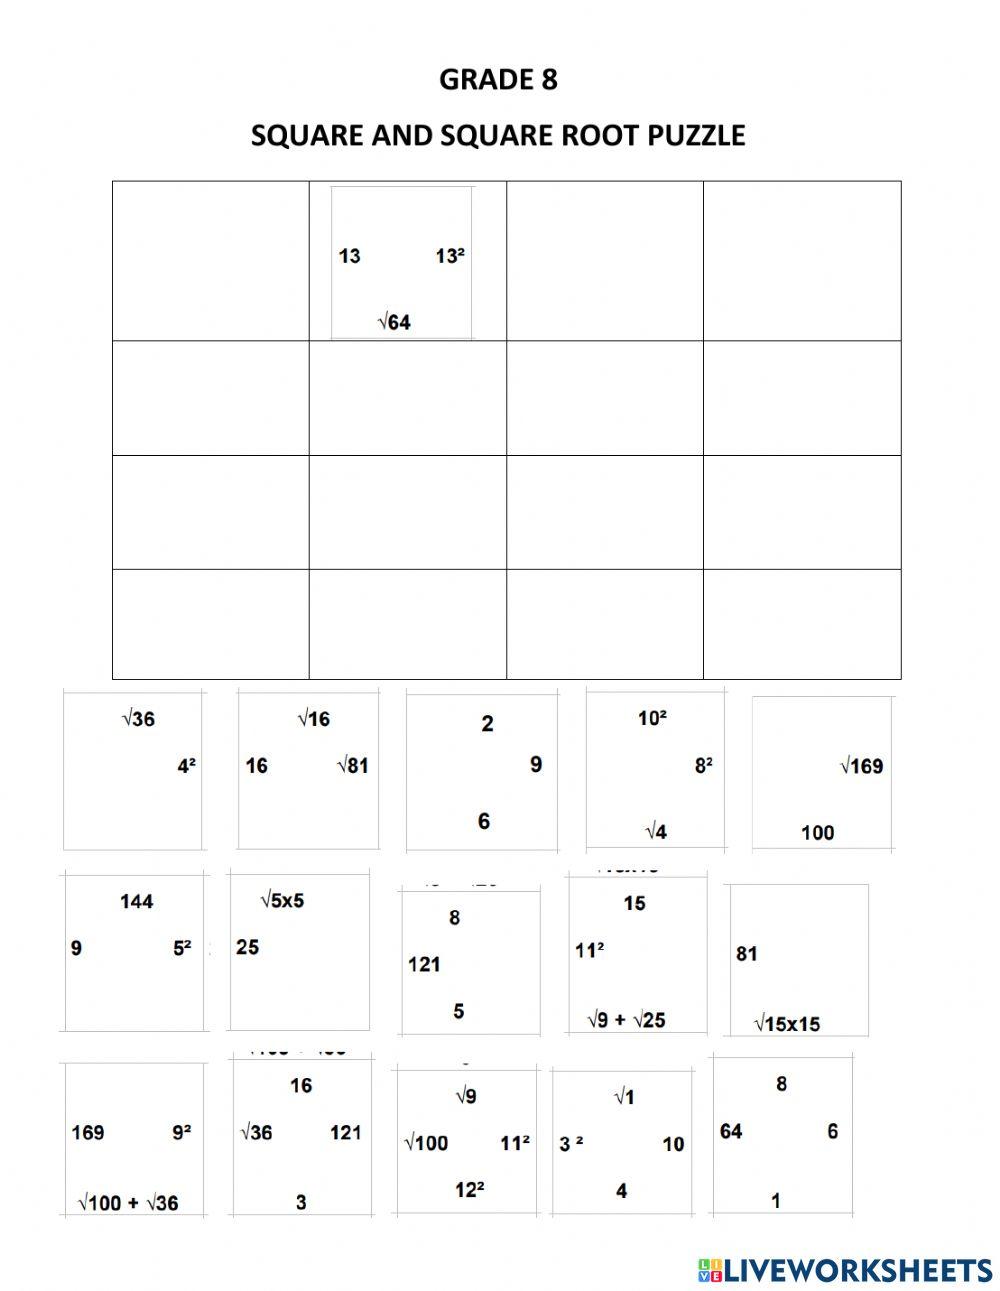 Jigsaw Puzzle for Square and Square roots